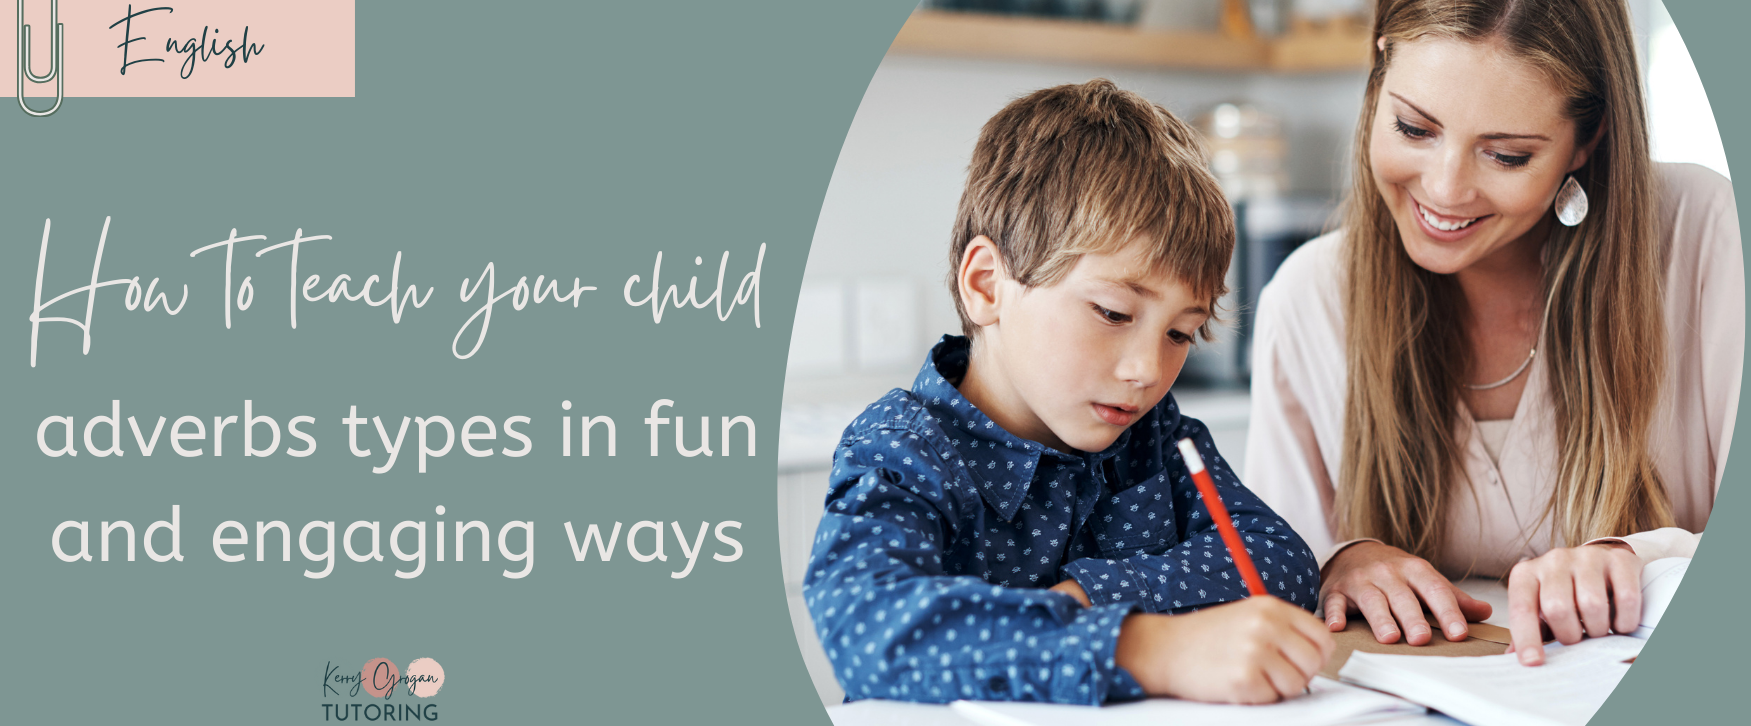 How to teach your child adverbs types in fun and engaging ways